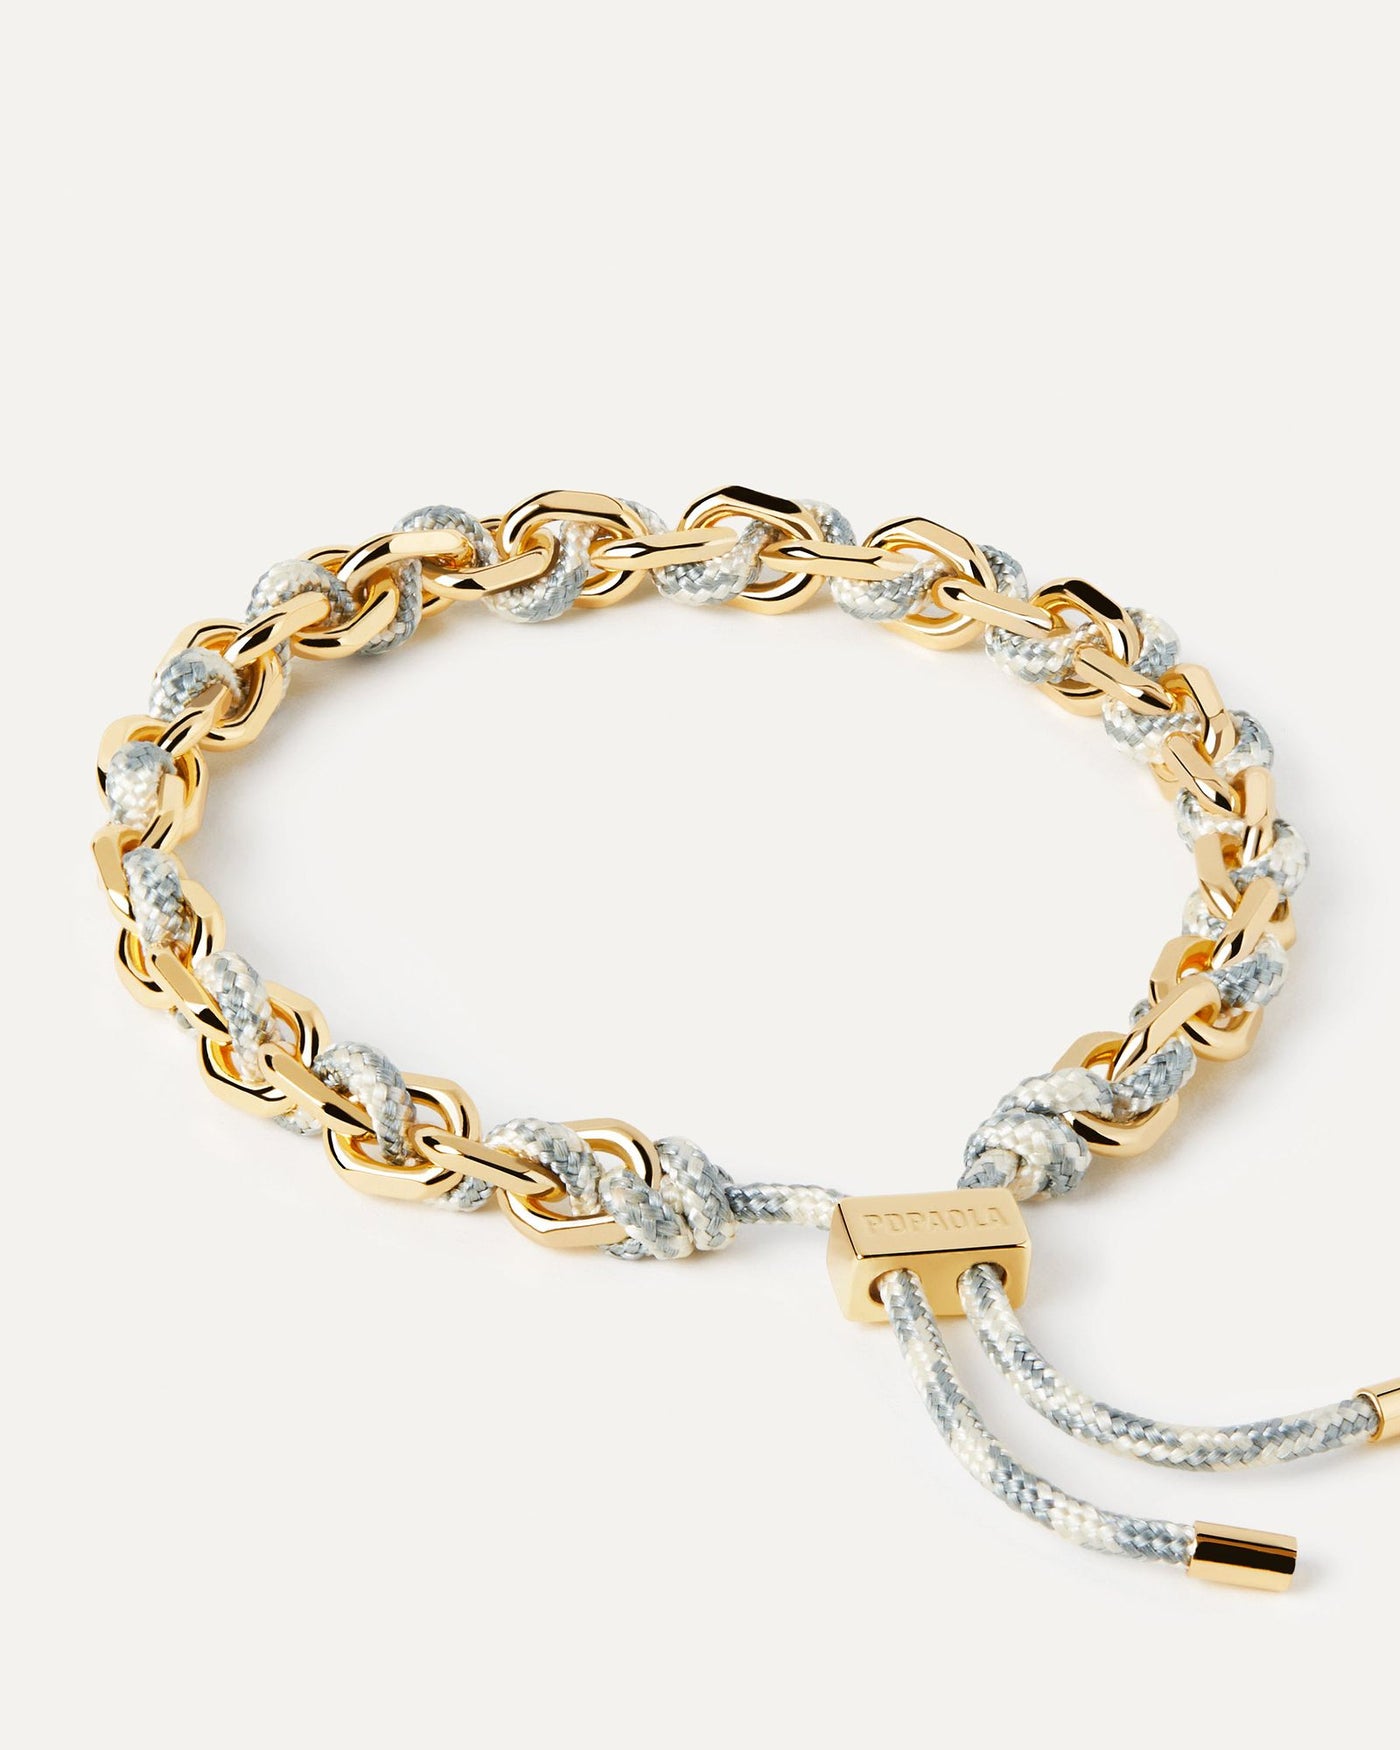 2024 Selection | Sky Rope and Chain Bracelet. Golden chain bracelet with a blue and white rope adjustable sliding clasp. Get the latest arrival from PDPAOLA. Place your order safely and get this Best Seller. Free Shipping.